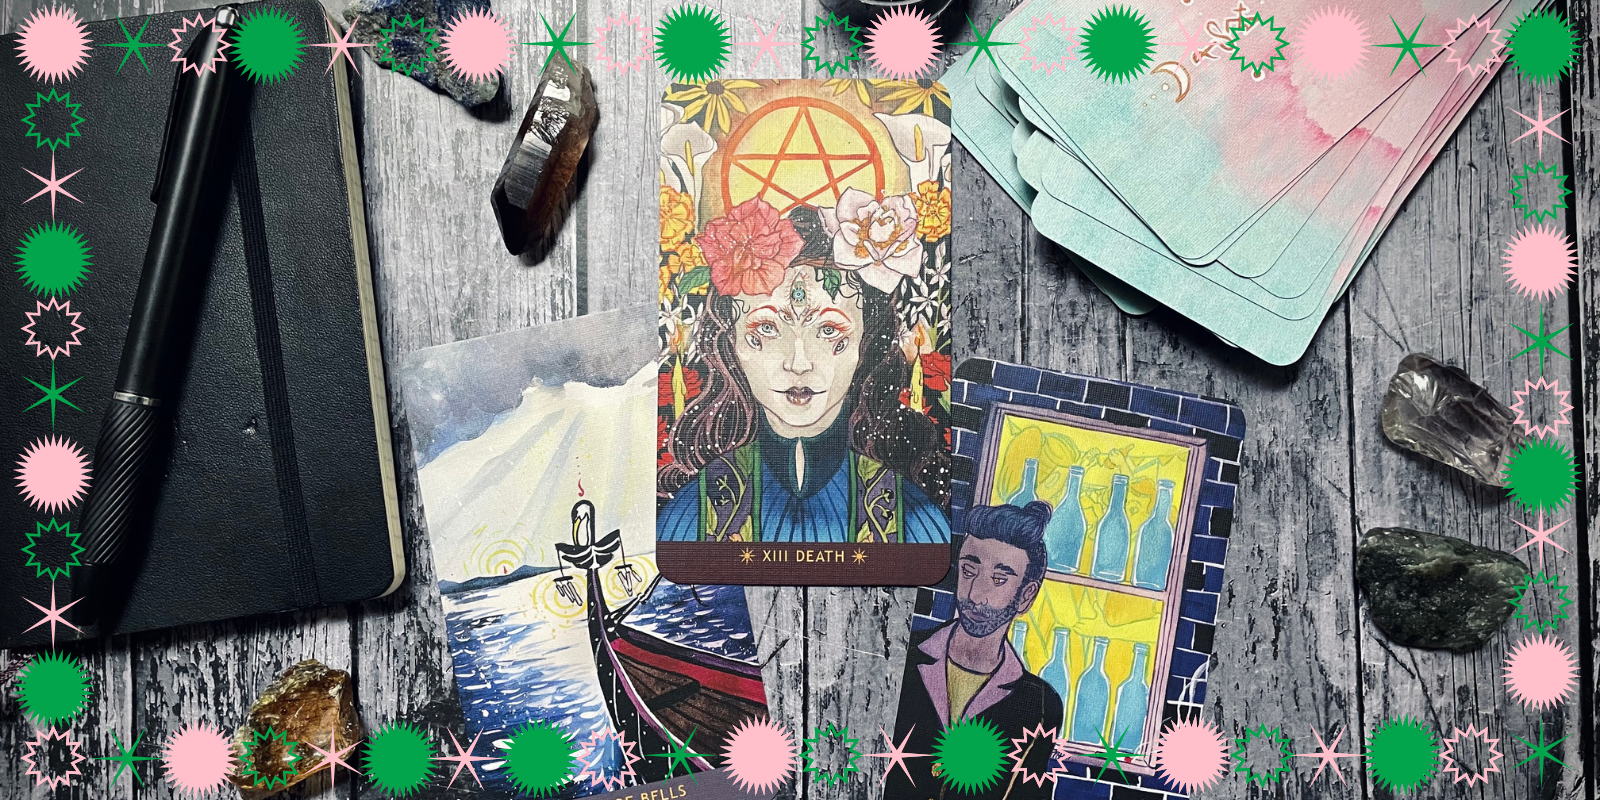 gorgeous tarot spread on a wood table, includes a notebook and pen, a tarot deck, multiple crystals, and three pulled cards: six of bells, death, and eight of vials